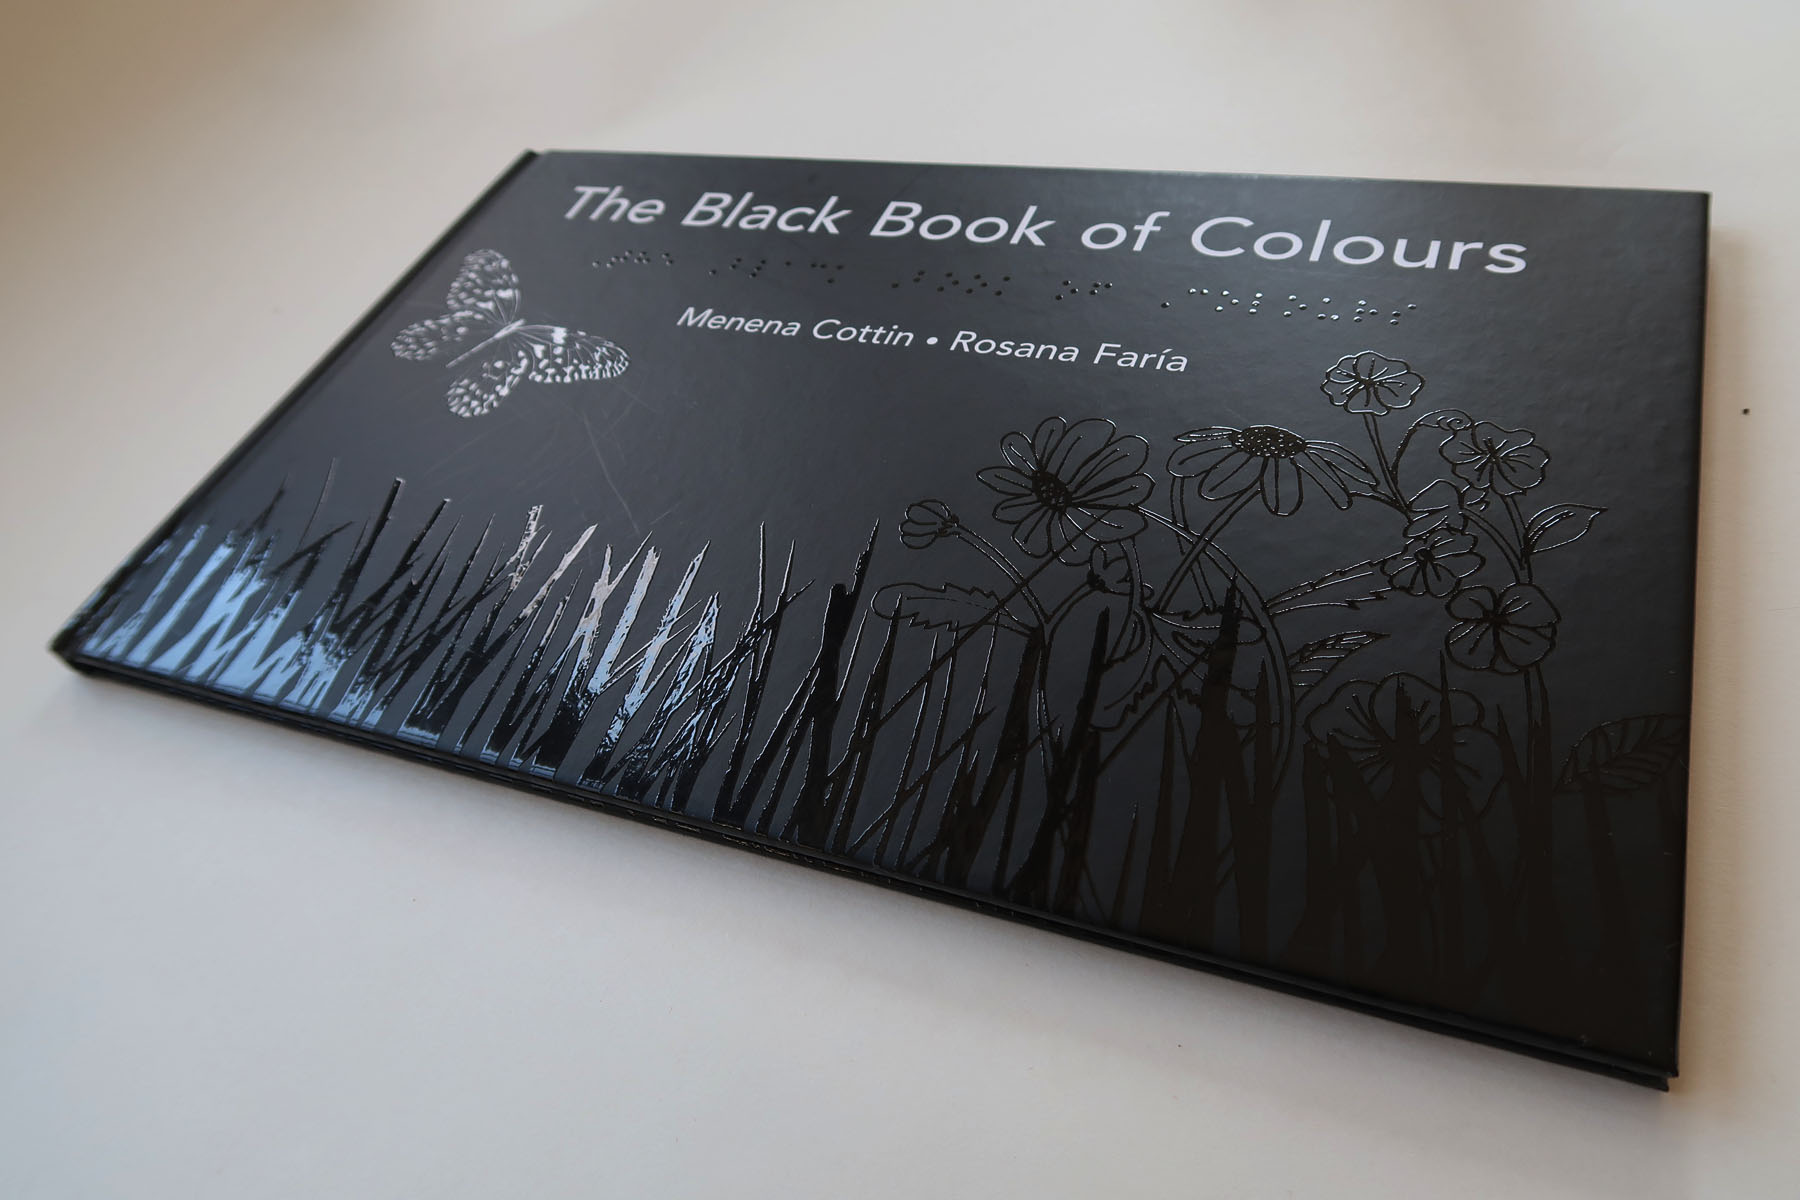 The Black Book of Colours